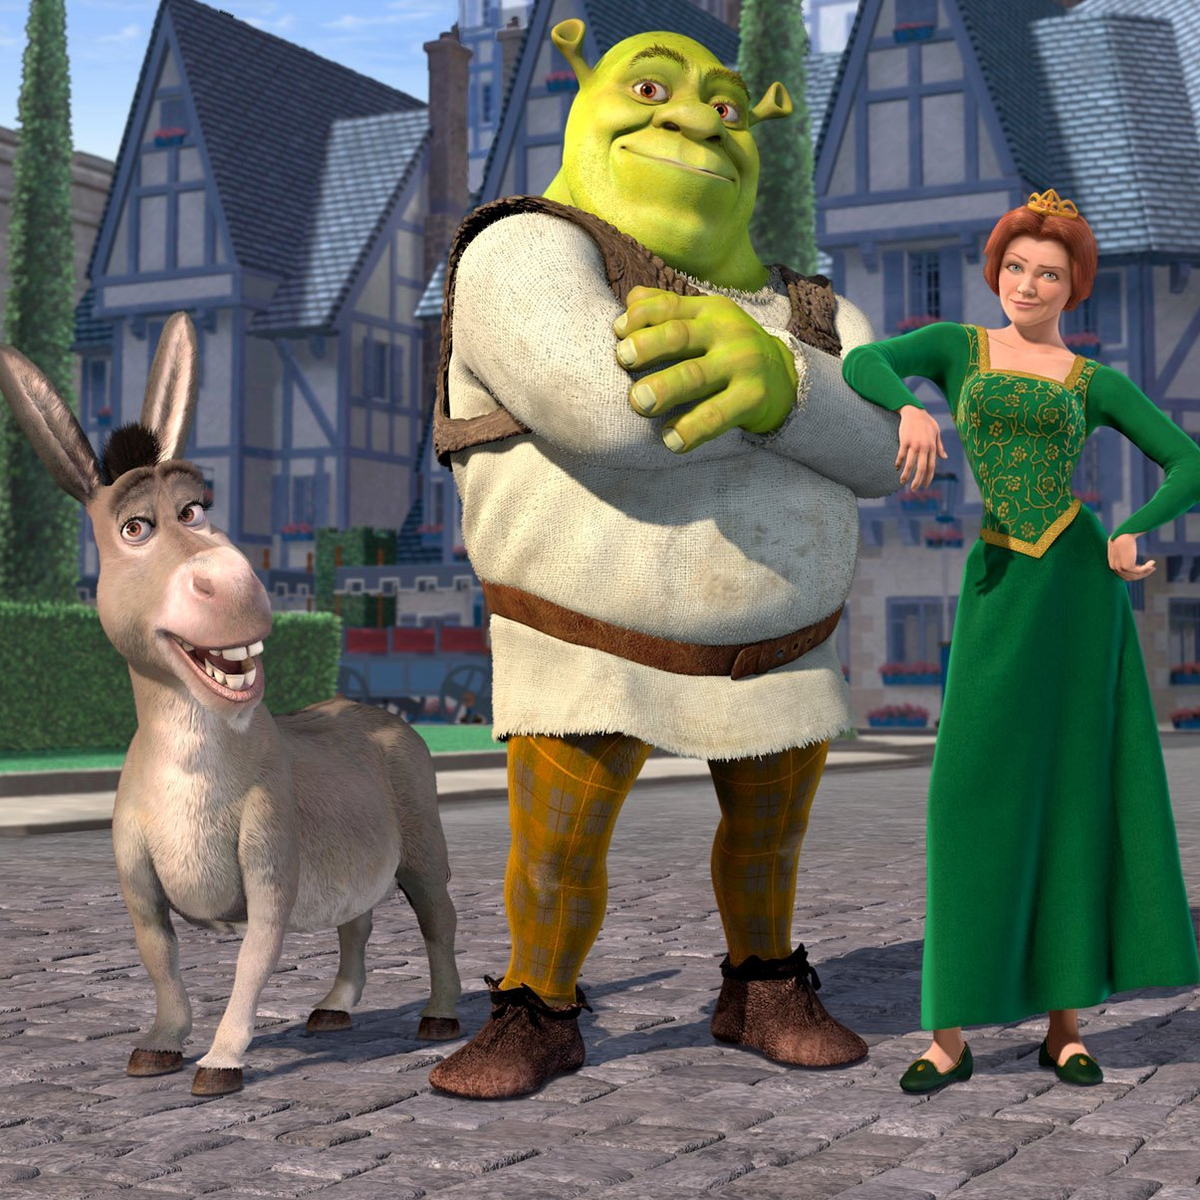 Shrek 5’s All-Star Cast and Release Date Revealed